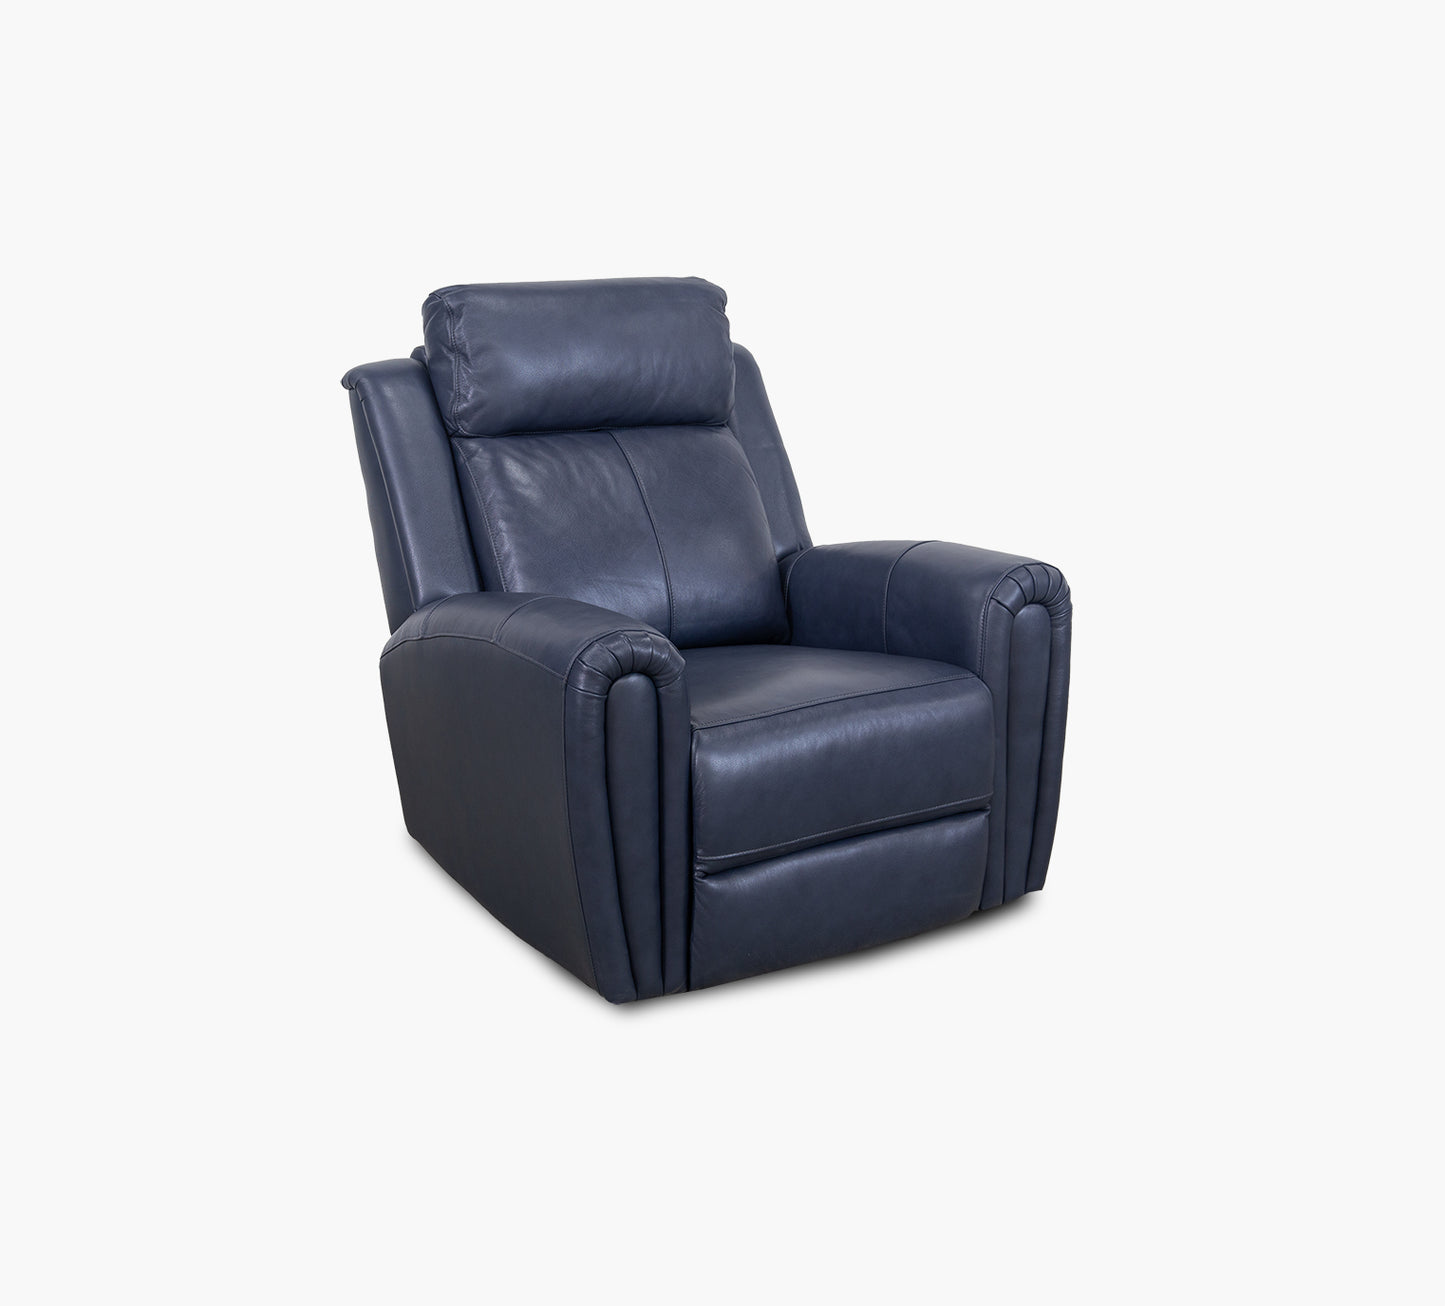 Jonathan Blue Leather Glider Recliner